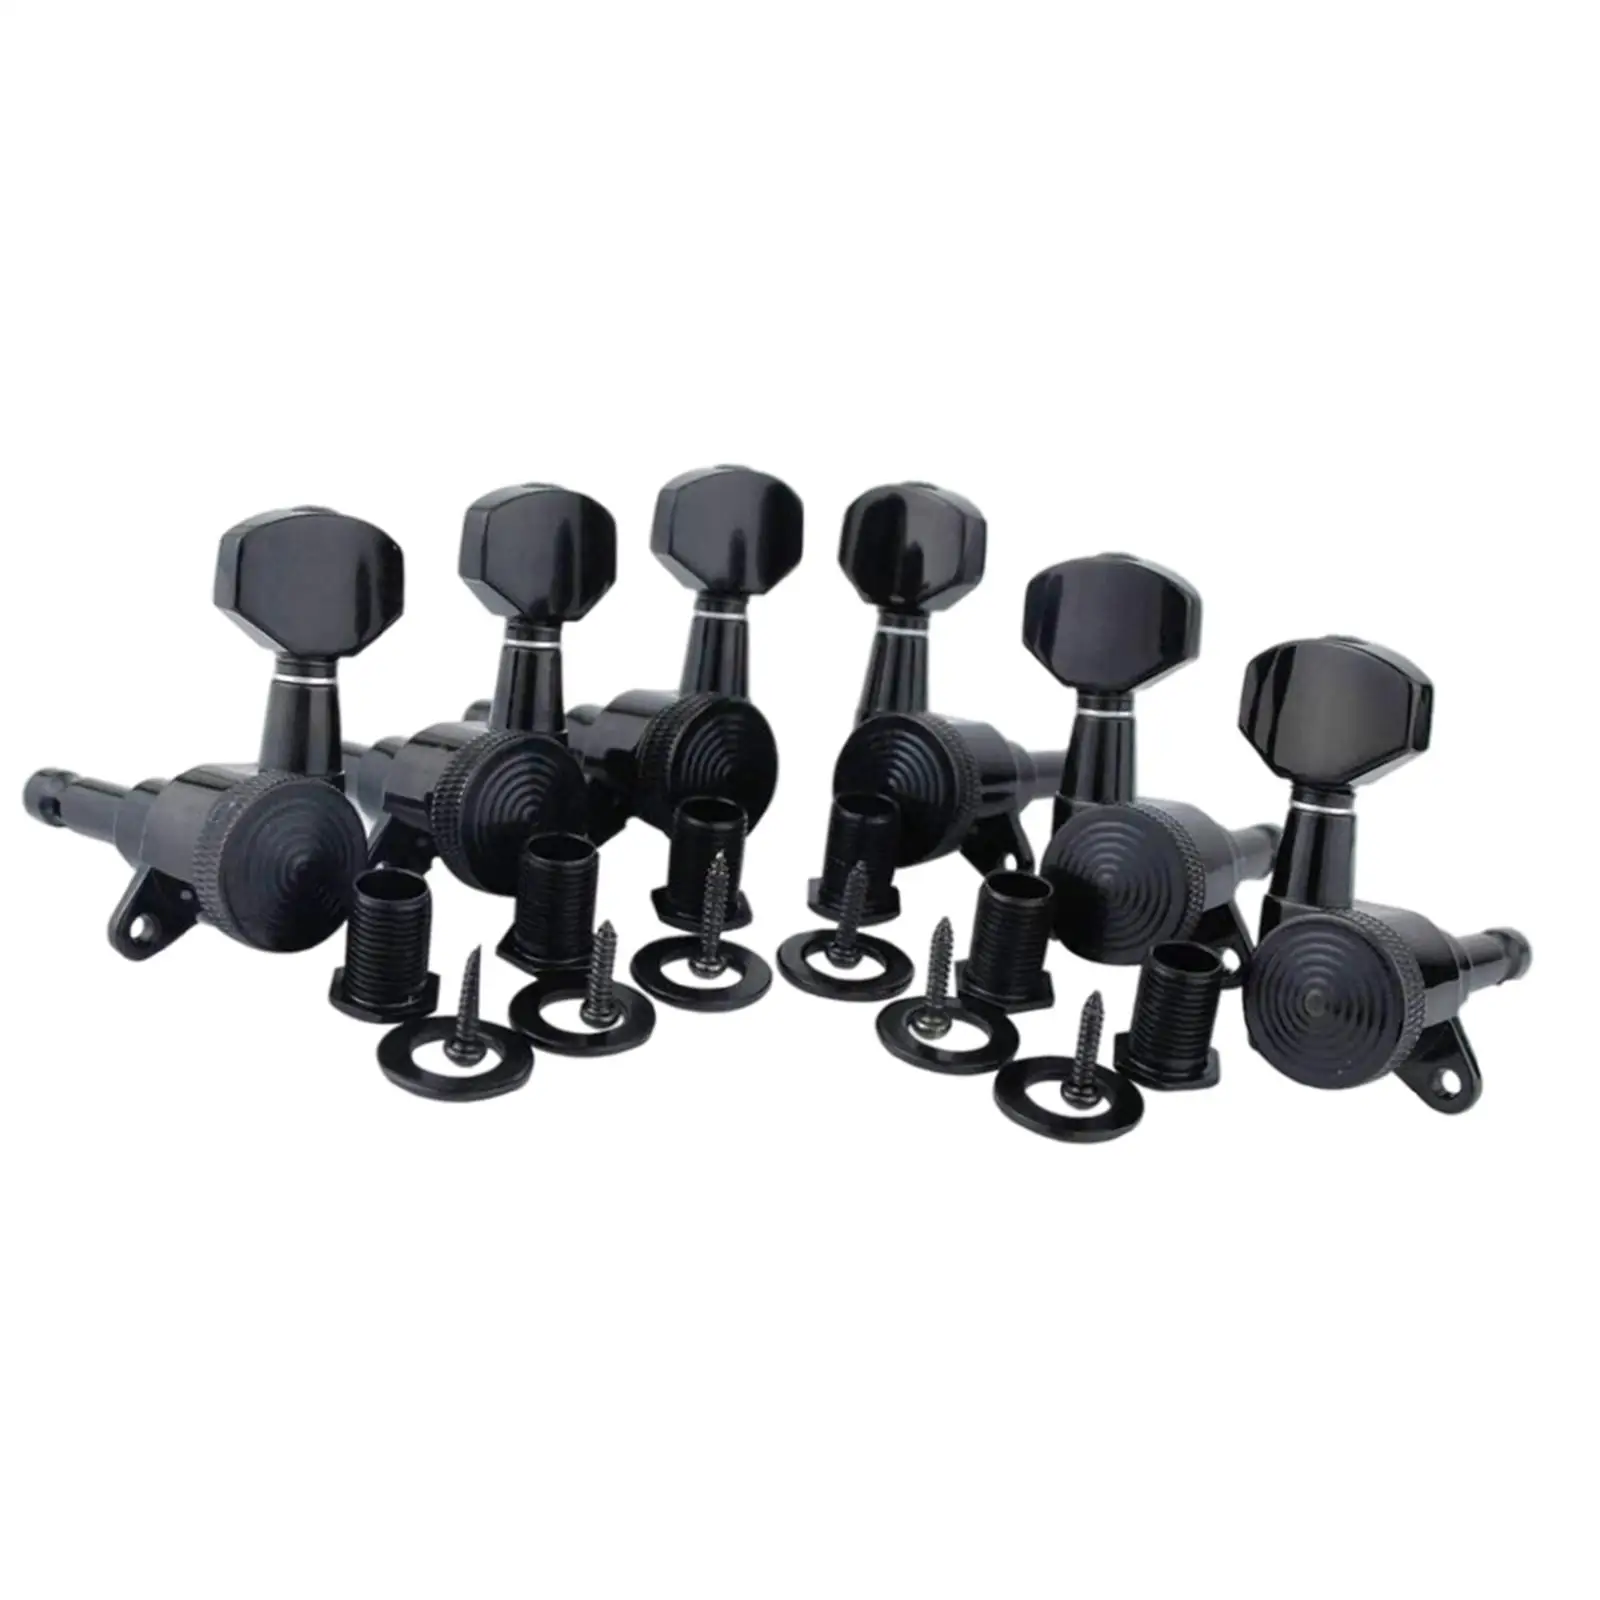 6/Set Locking Guitar Tuners Gear Ratio 1:18 Knobs Tuning Keys 10mm Headstock Holes Wear-Resistant for Electric Guitars Chrome